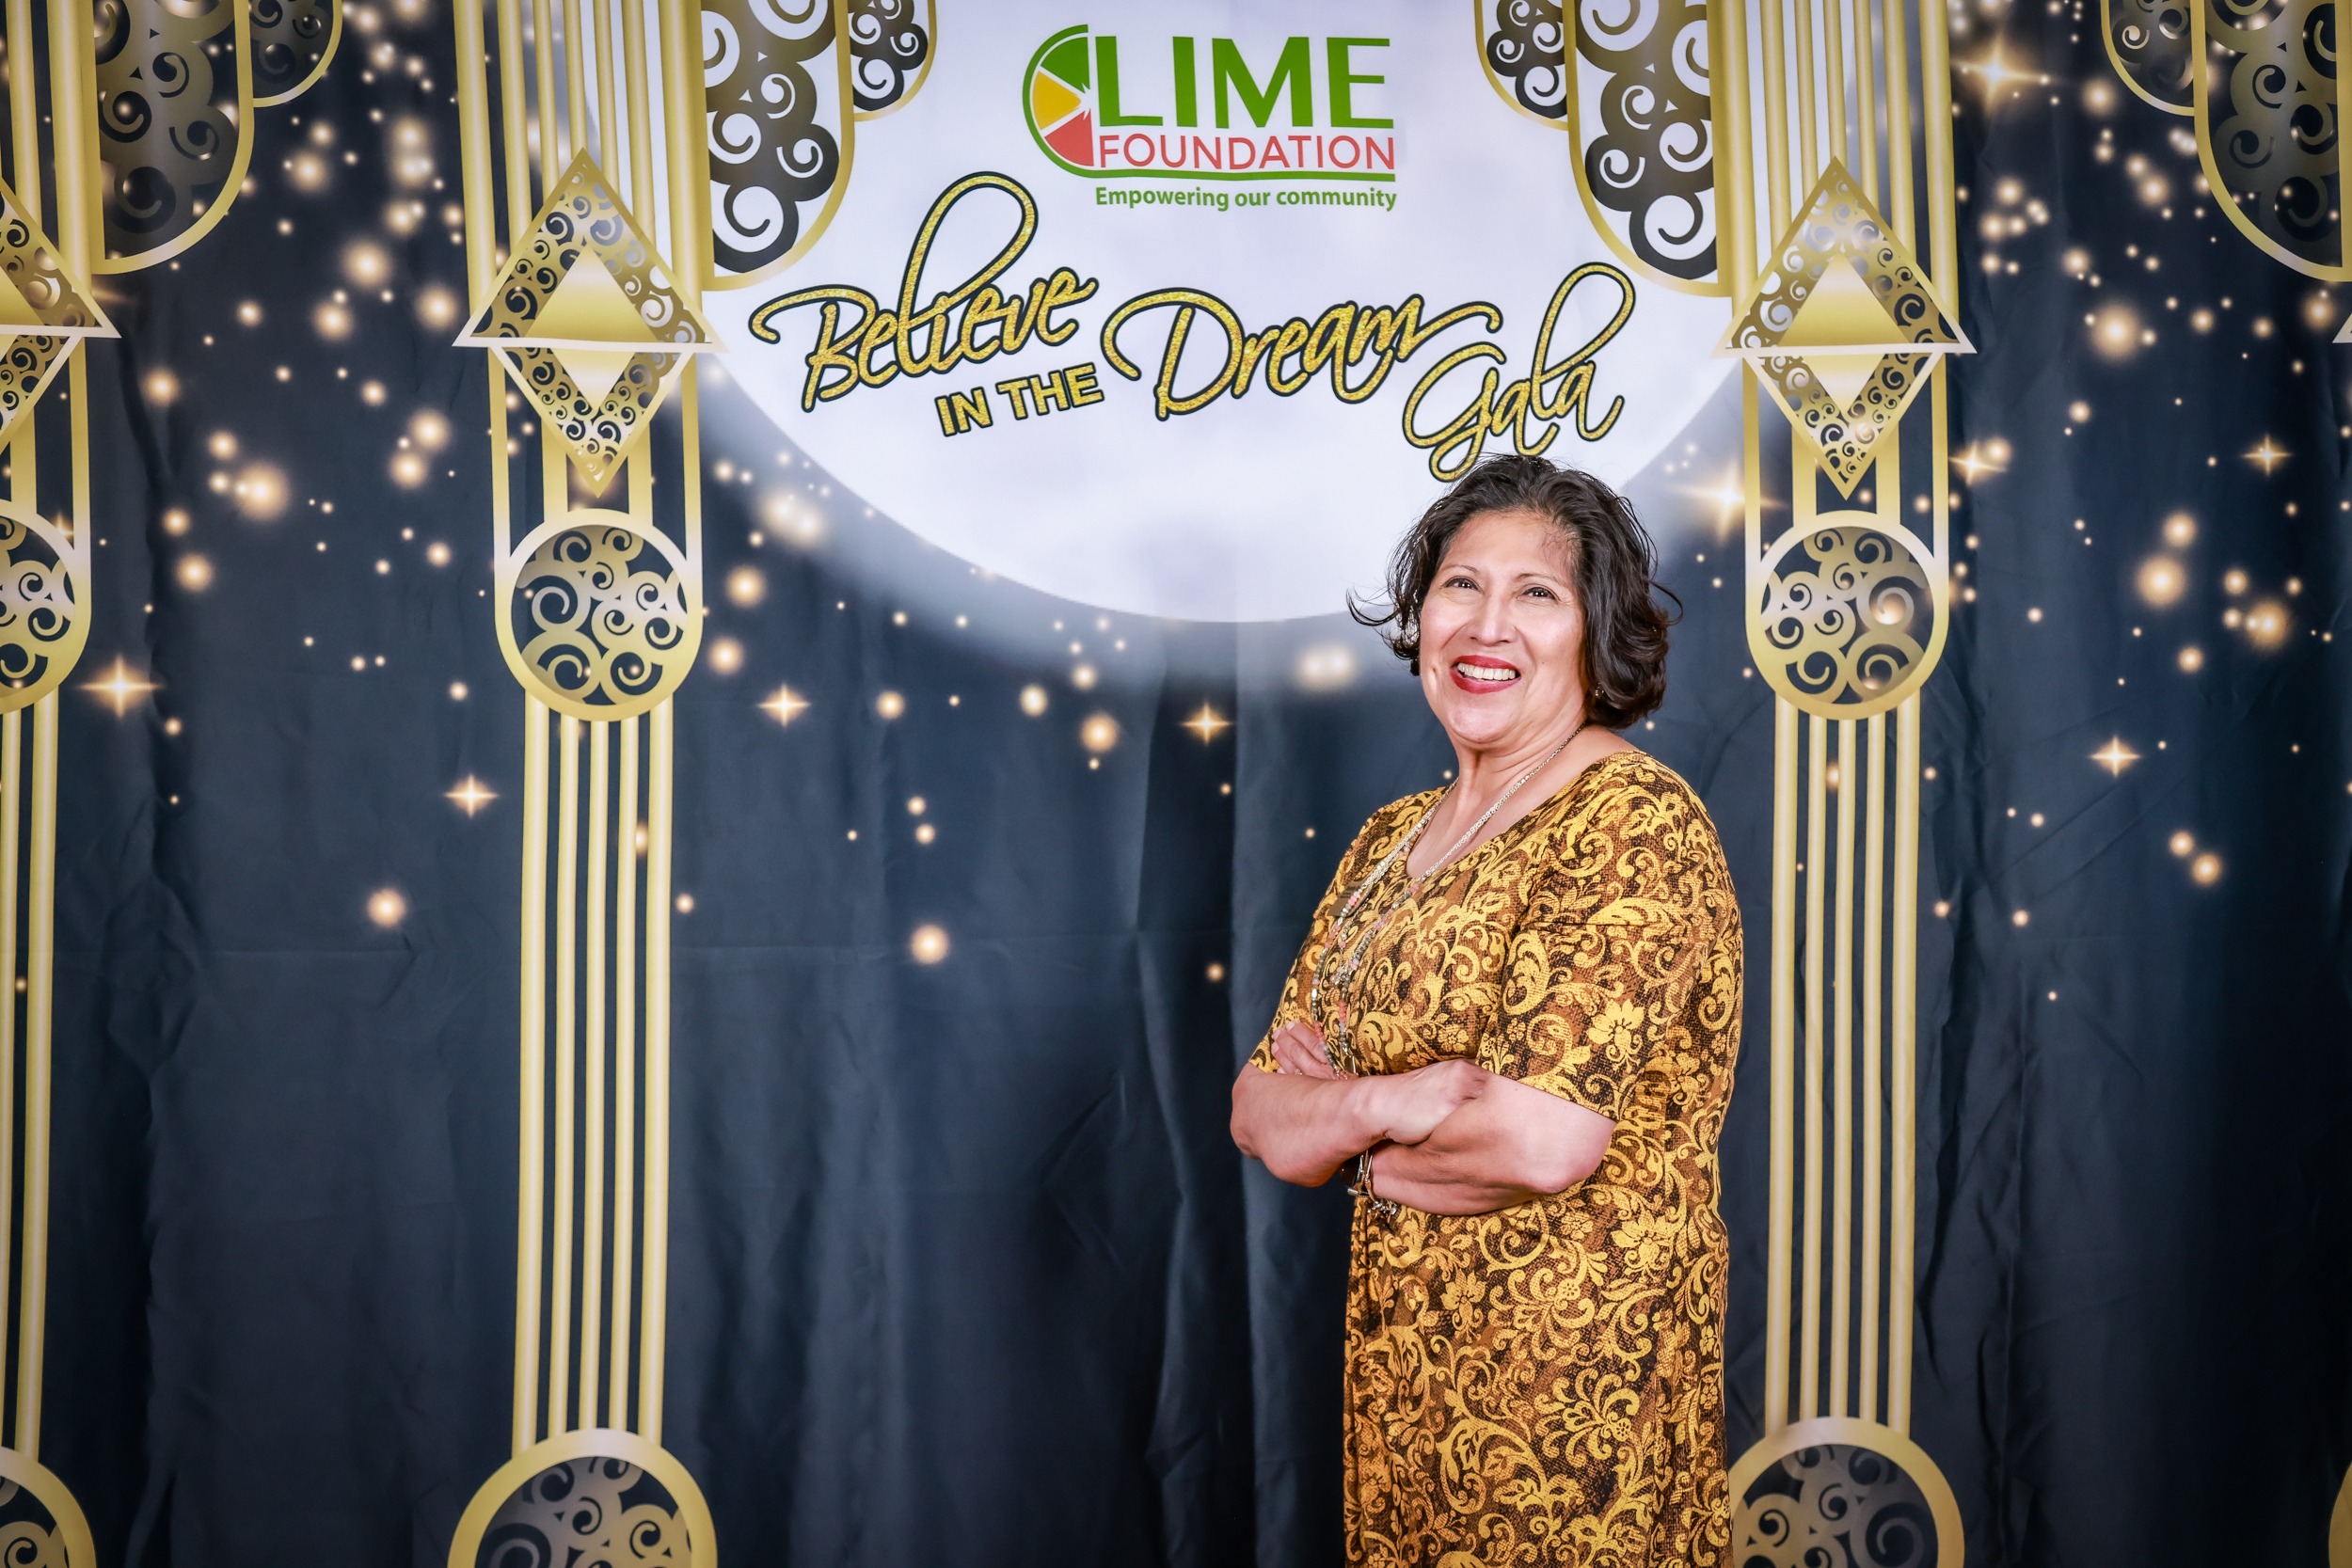 A woman in a gold dress stands in front of a backdrop at The LIME Foundation of Santa Rosa.